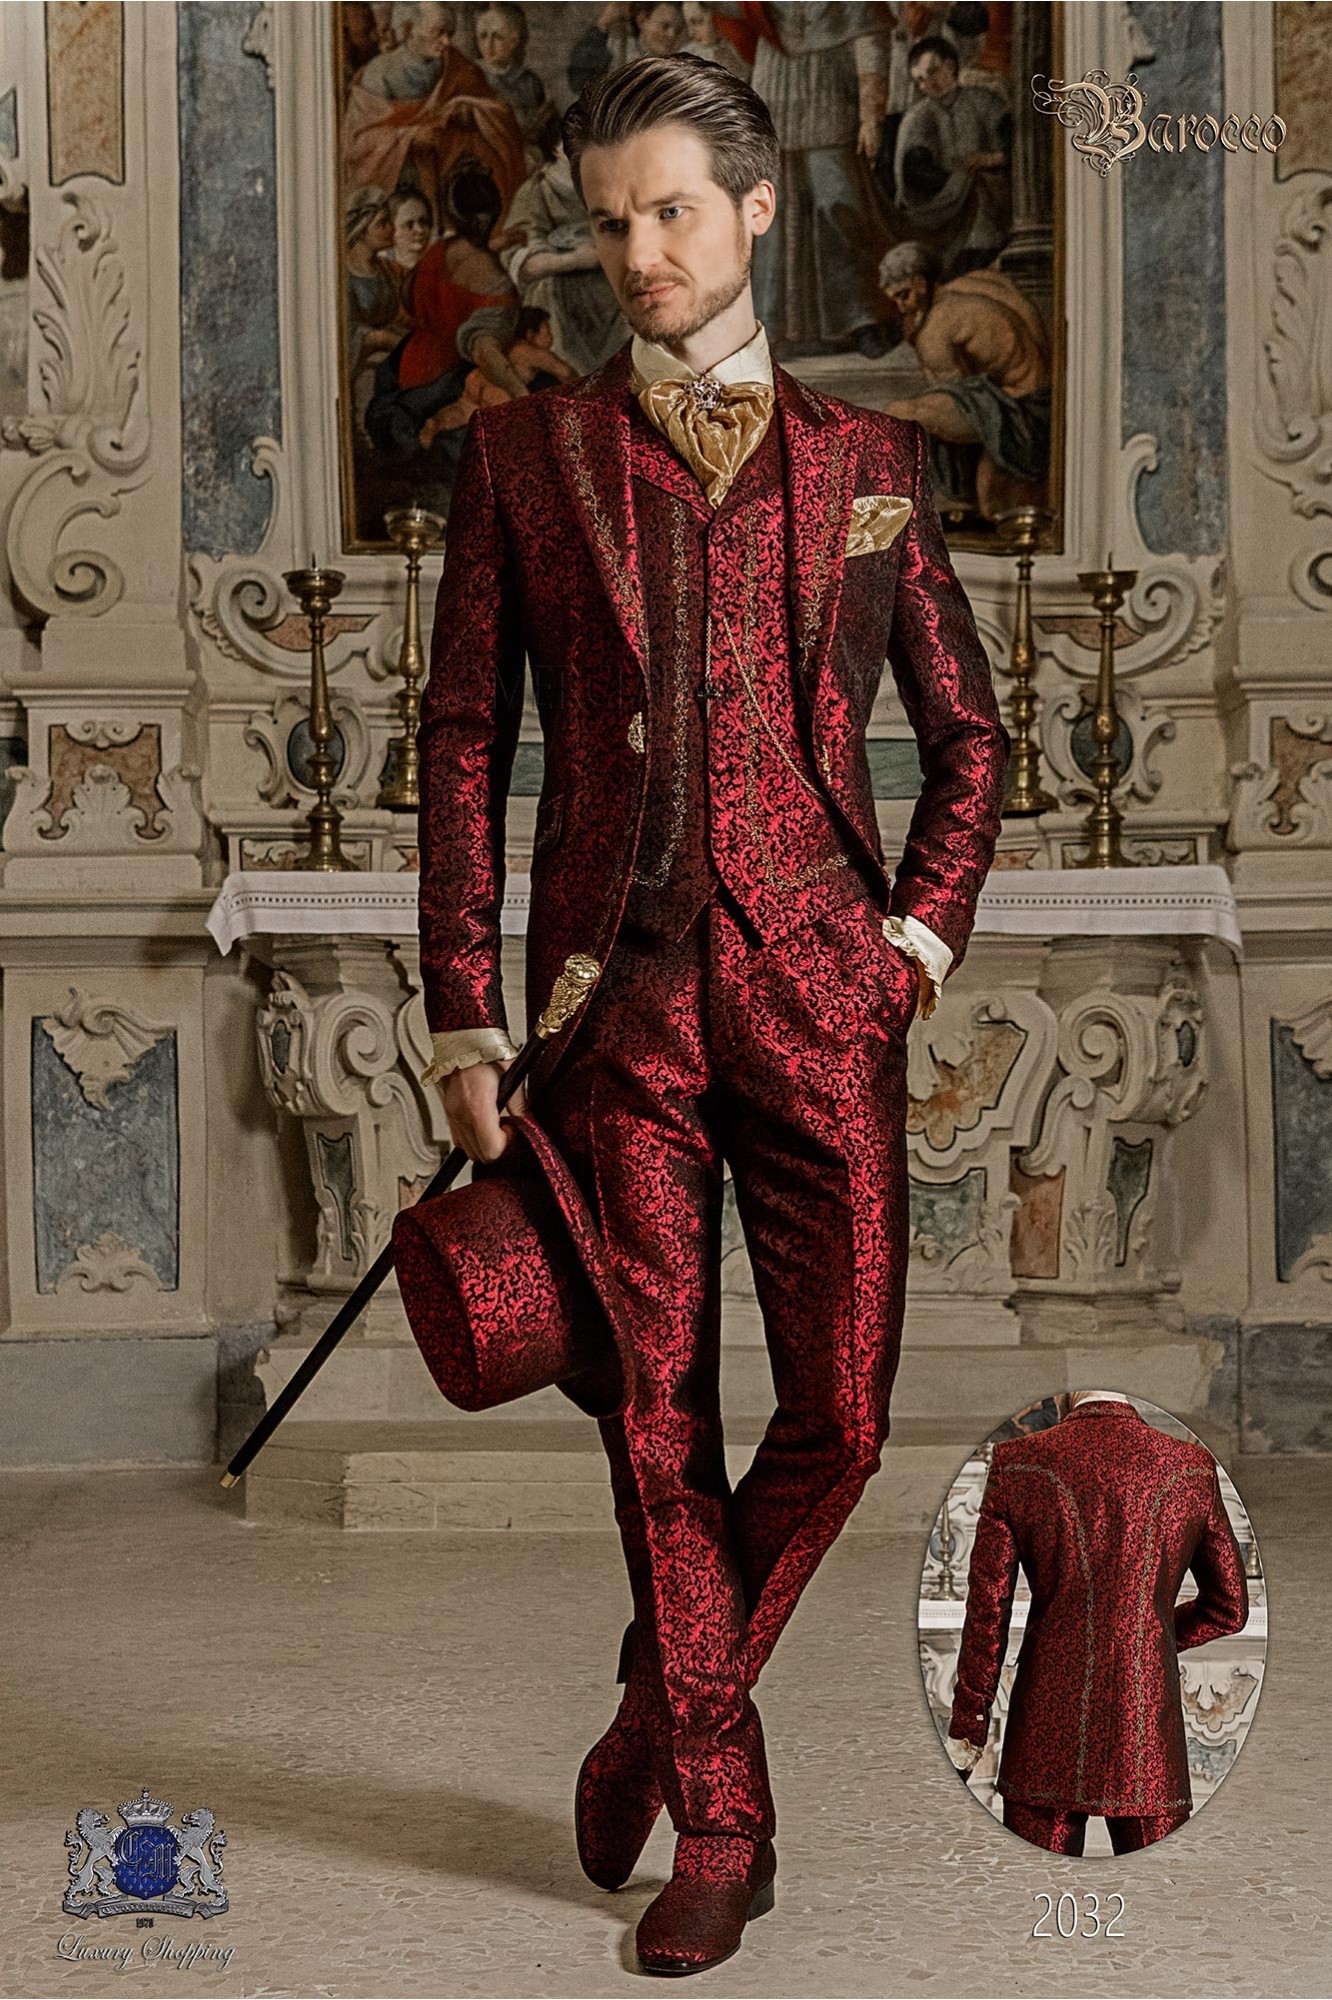  vintage frock coat in red jacquard fabric with golden embroidery and crystal clasp model 2032 Mario Moyano